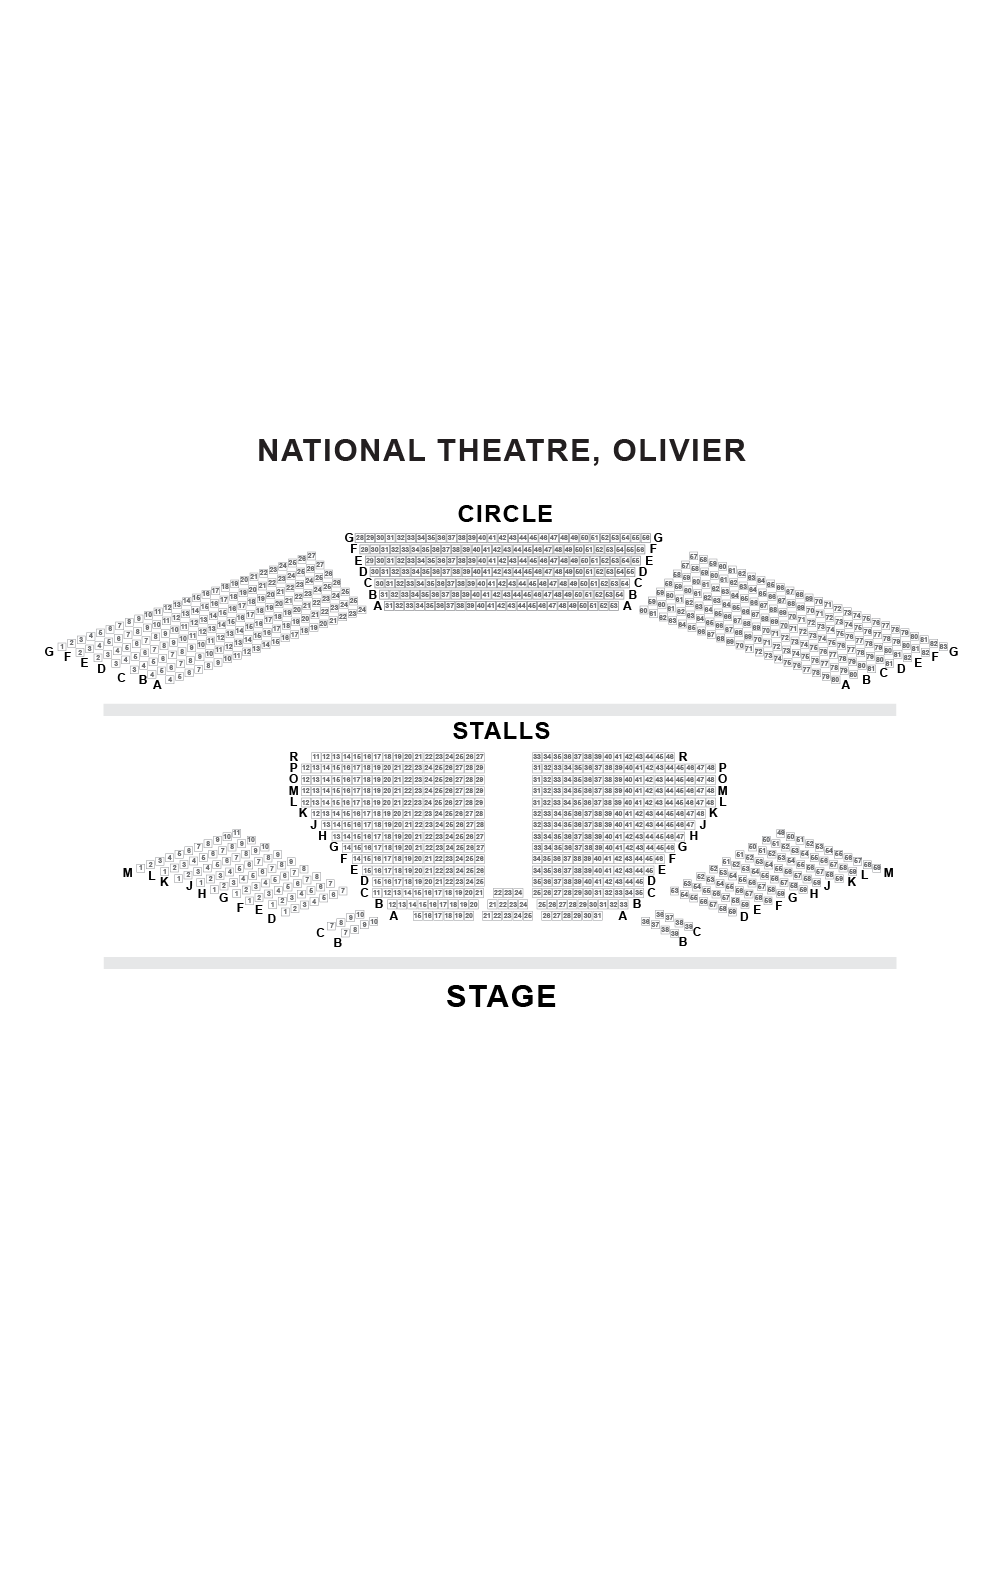 Olivier Theatre, National